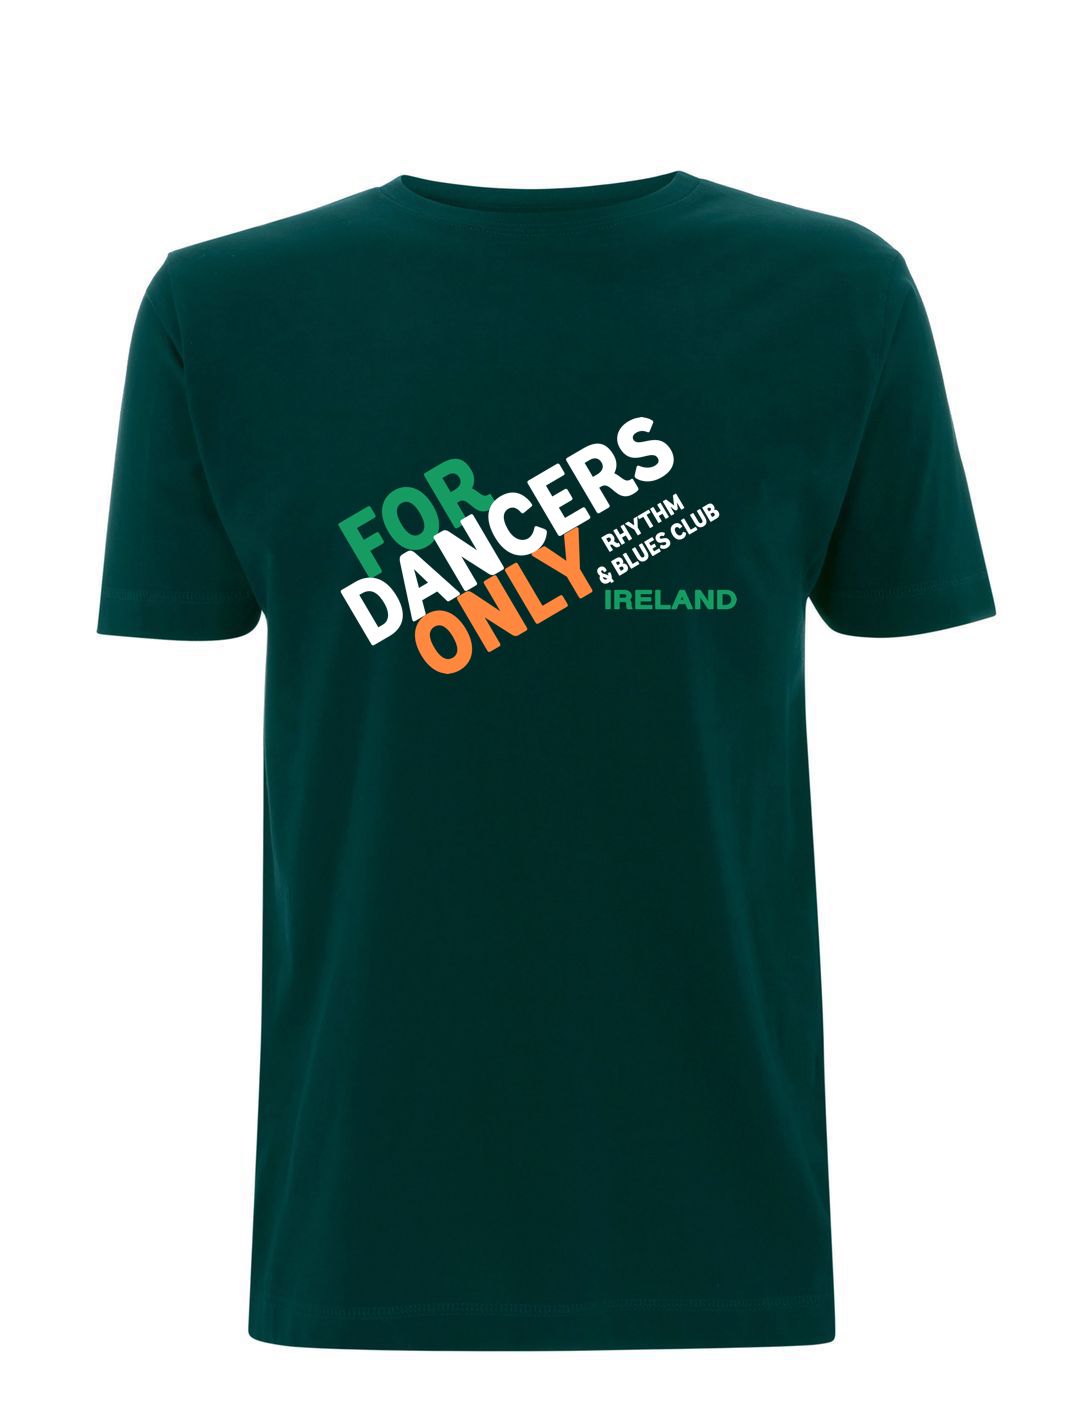 For Dancers Only (Ireland) - CLASSIC CLUB RANGE: Premium Organic T-Shirt (3 Colours) - Suit Yourself Music